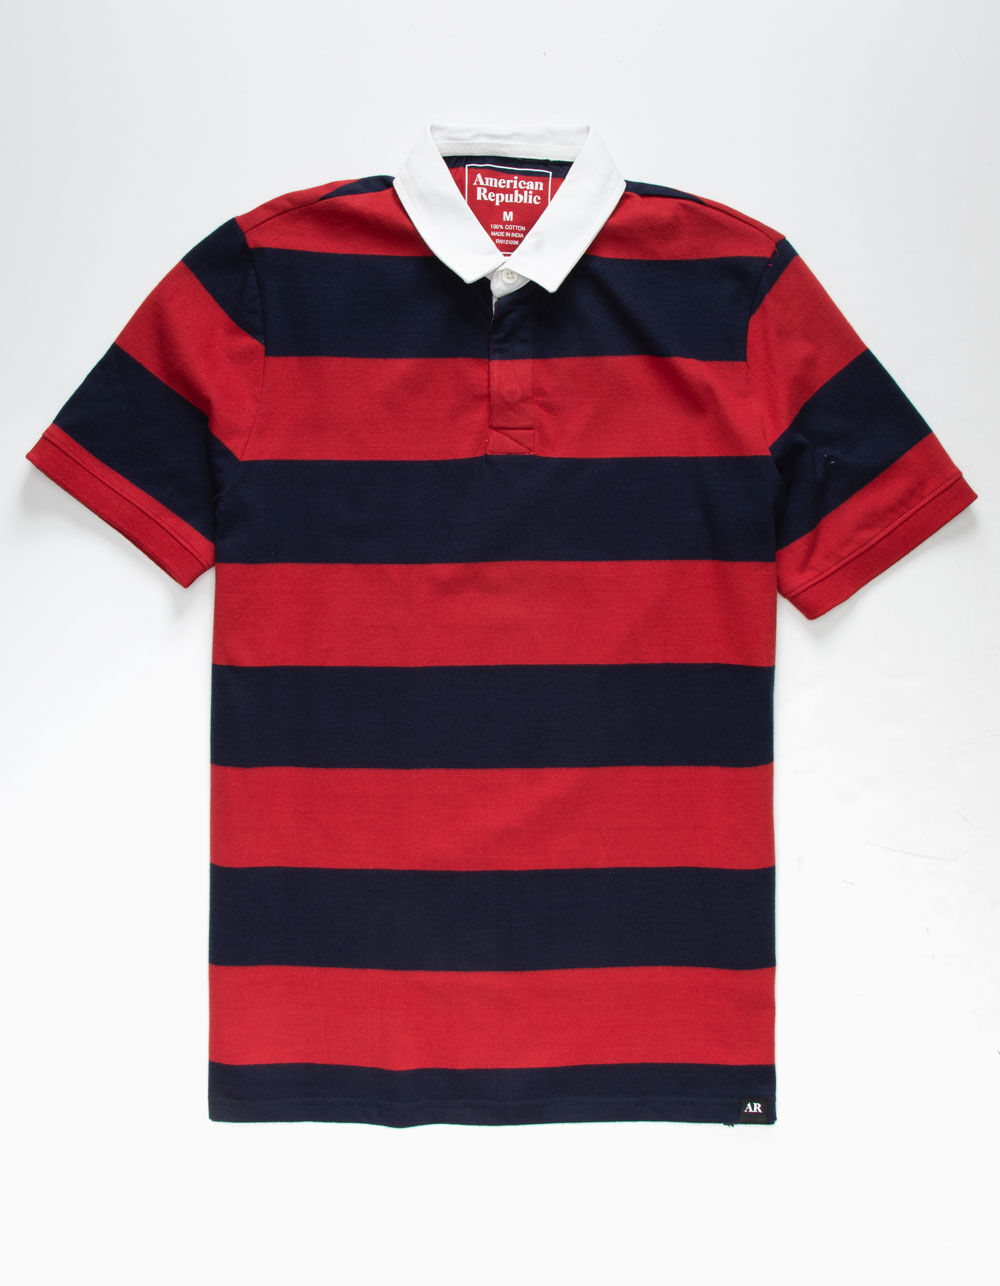 AMERICAN REPUBLIC Rugby Mens Red Polo Shirt - RED | Tillys